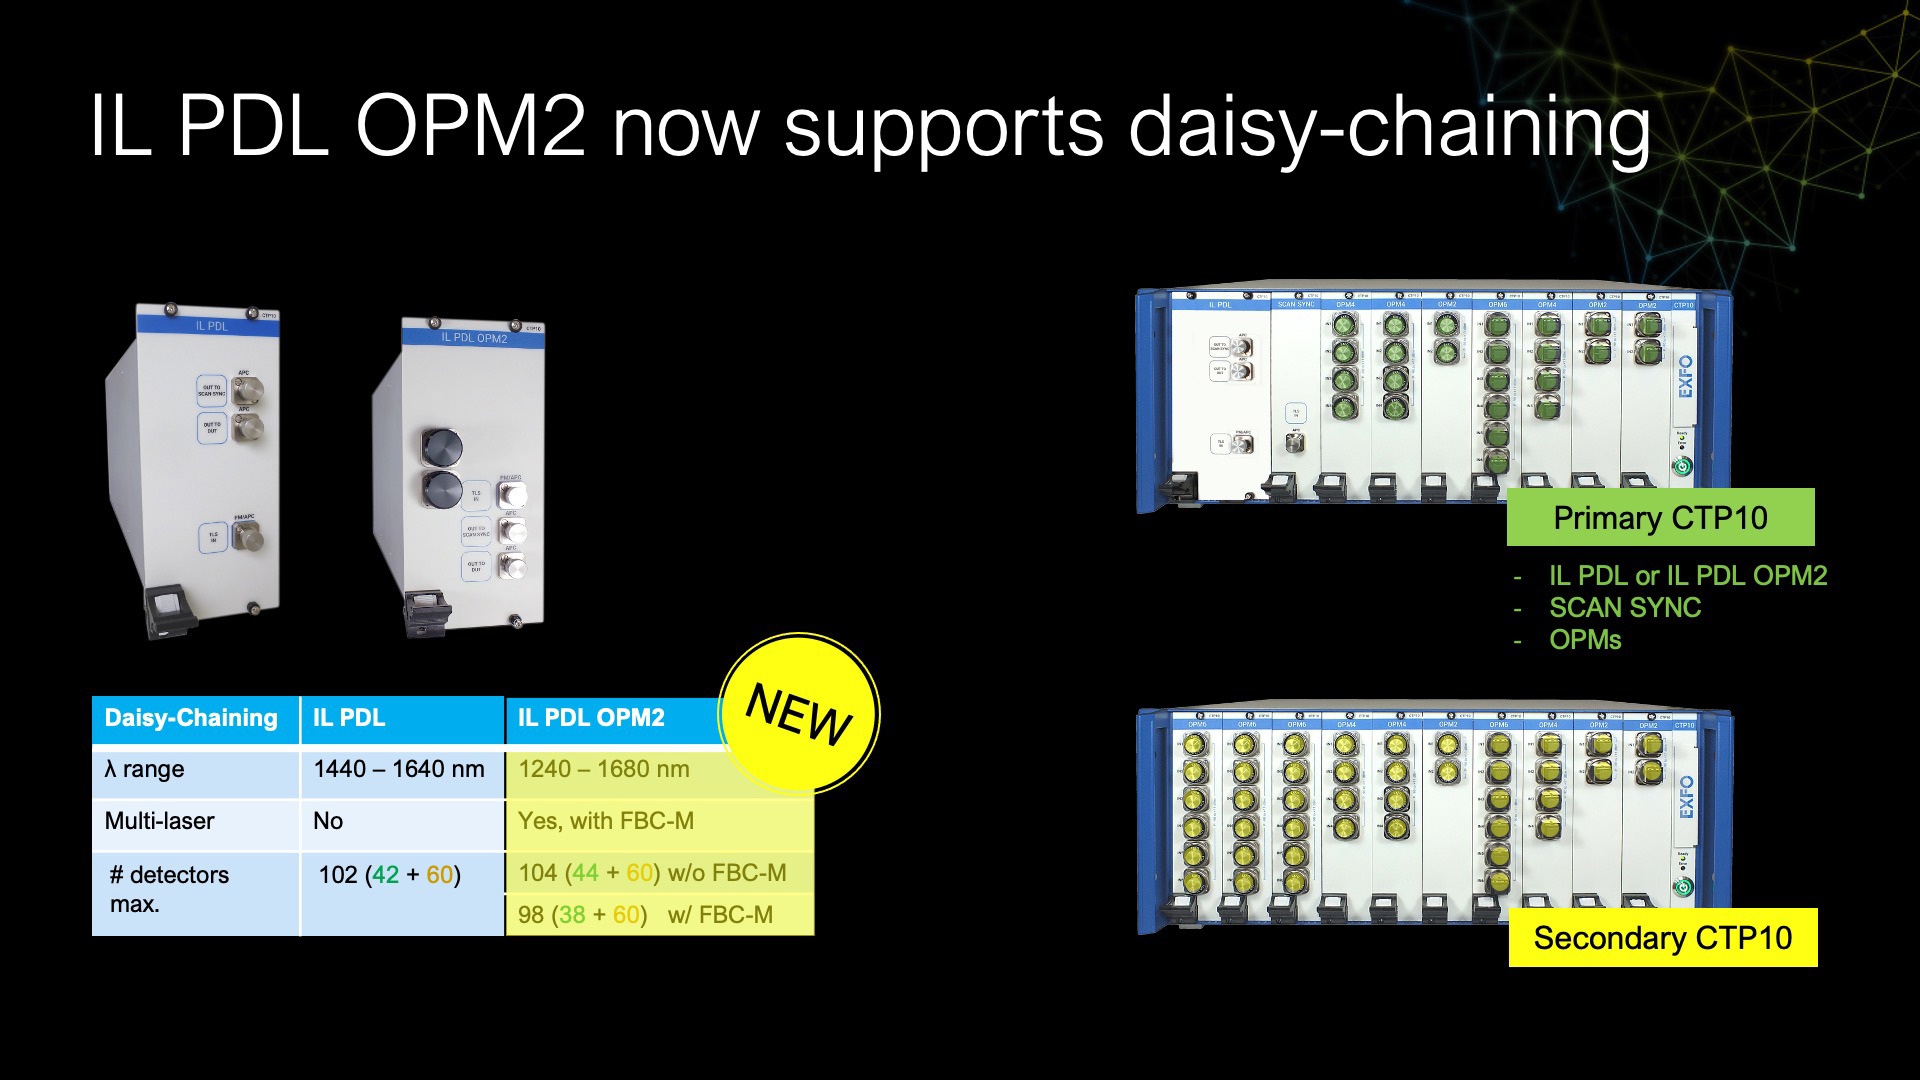 IL PDL OPM2 now supports daisy-chaining